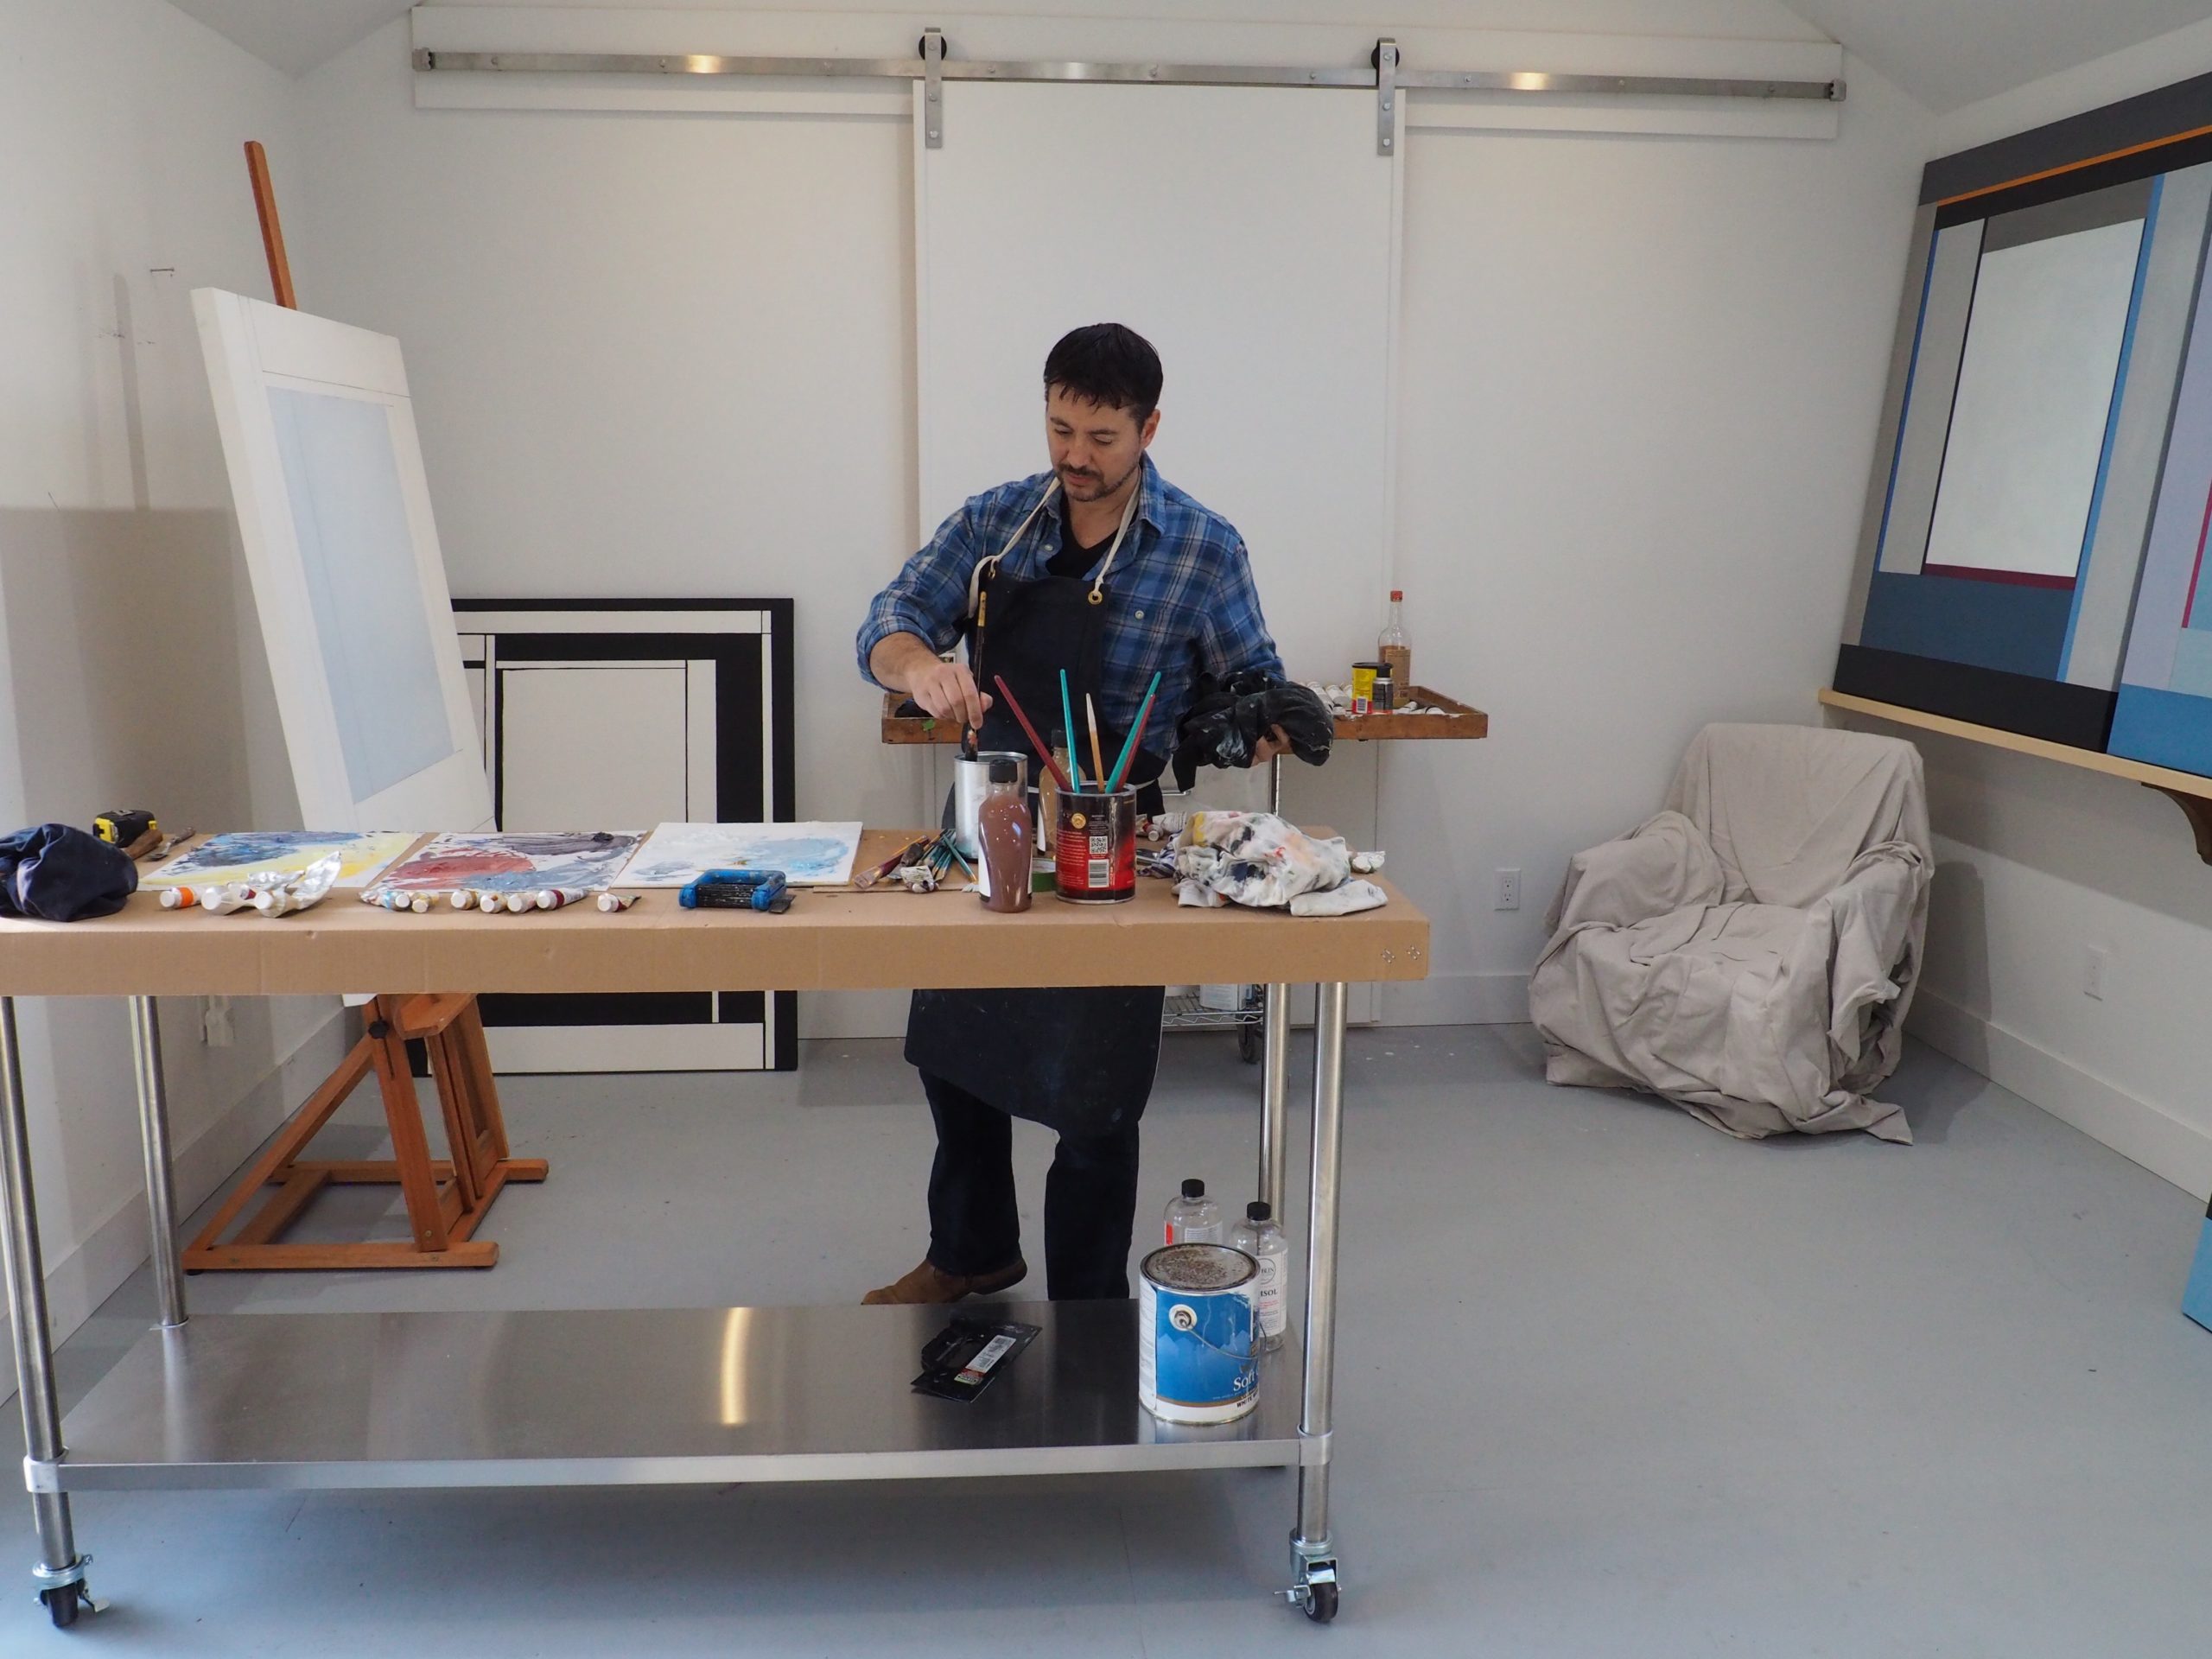 Chris Kelly at work in the studio.